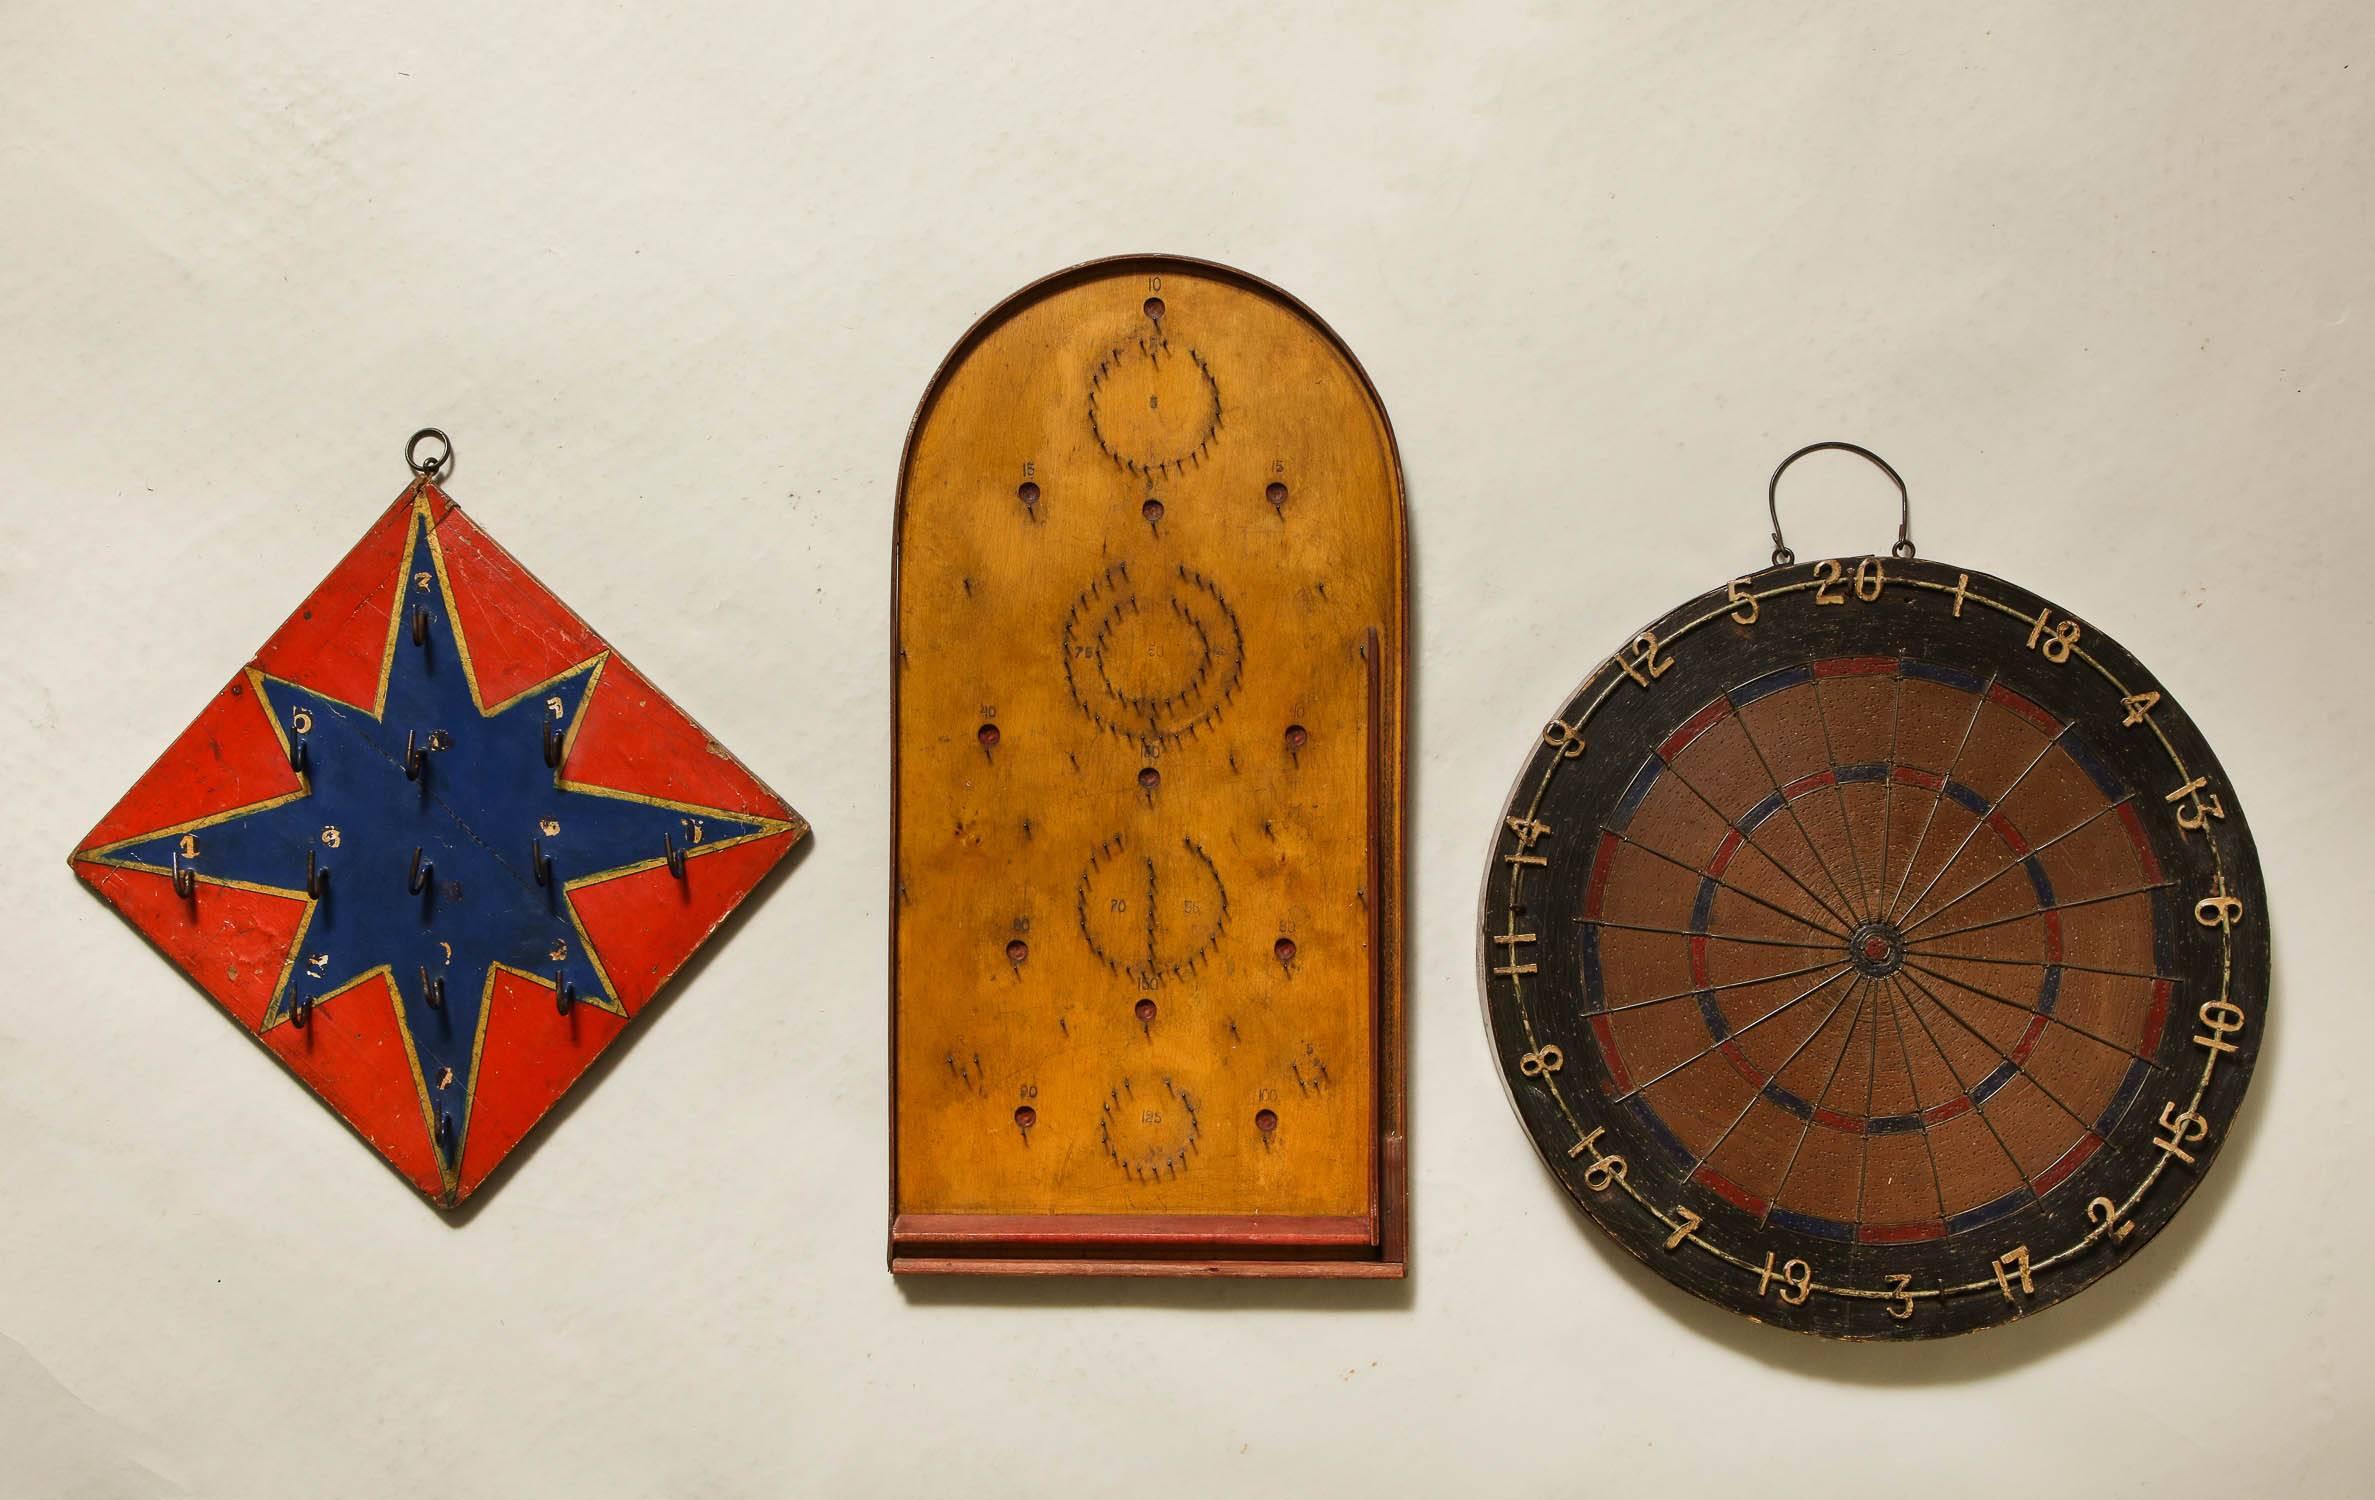 Charming group of three 19th century games comprising a dartboard, star ring toss and bagatelle boards, all in original paint and possessing both whimsy and good graphic design.

Size listed below for dartboard. Other sizes in additional